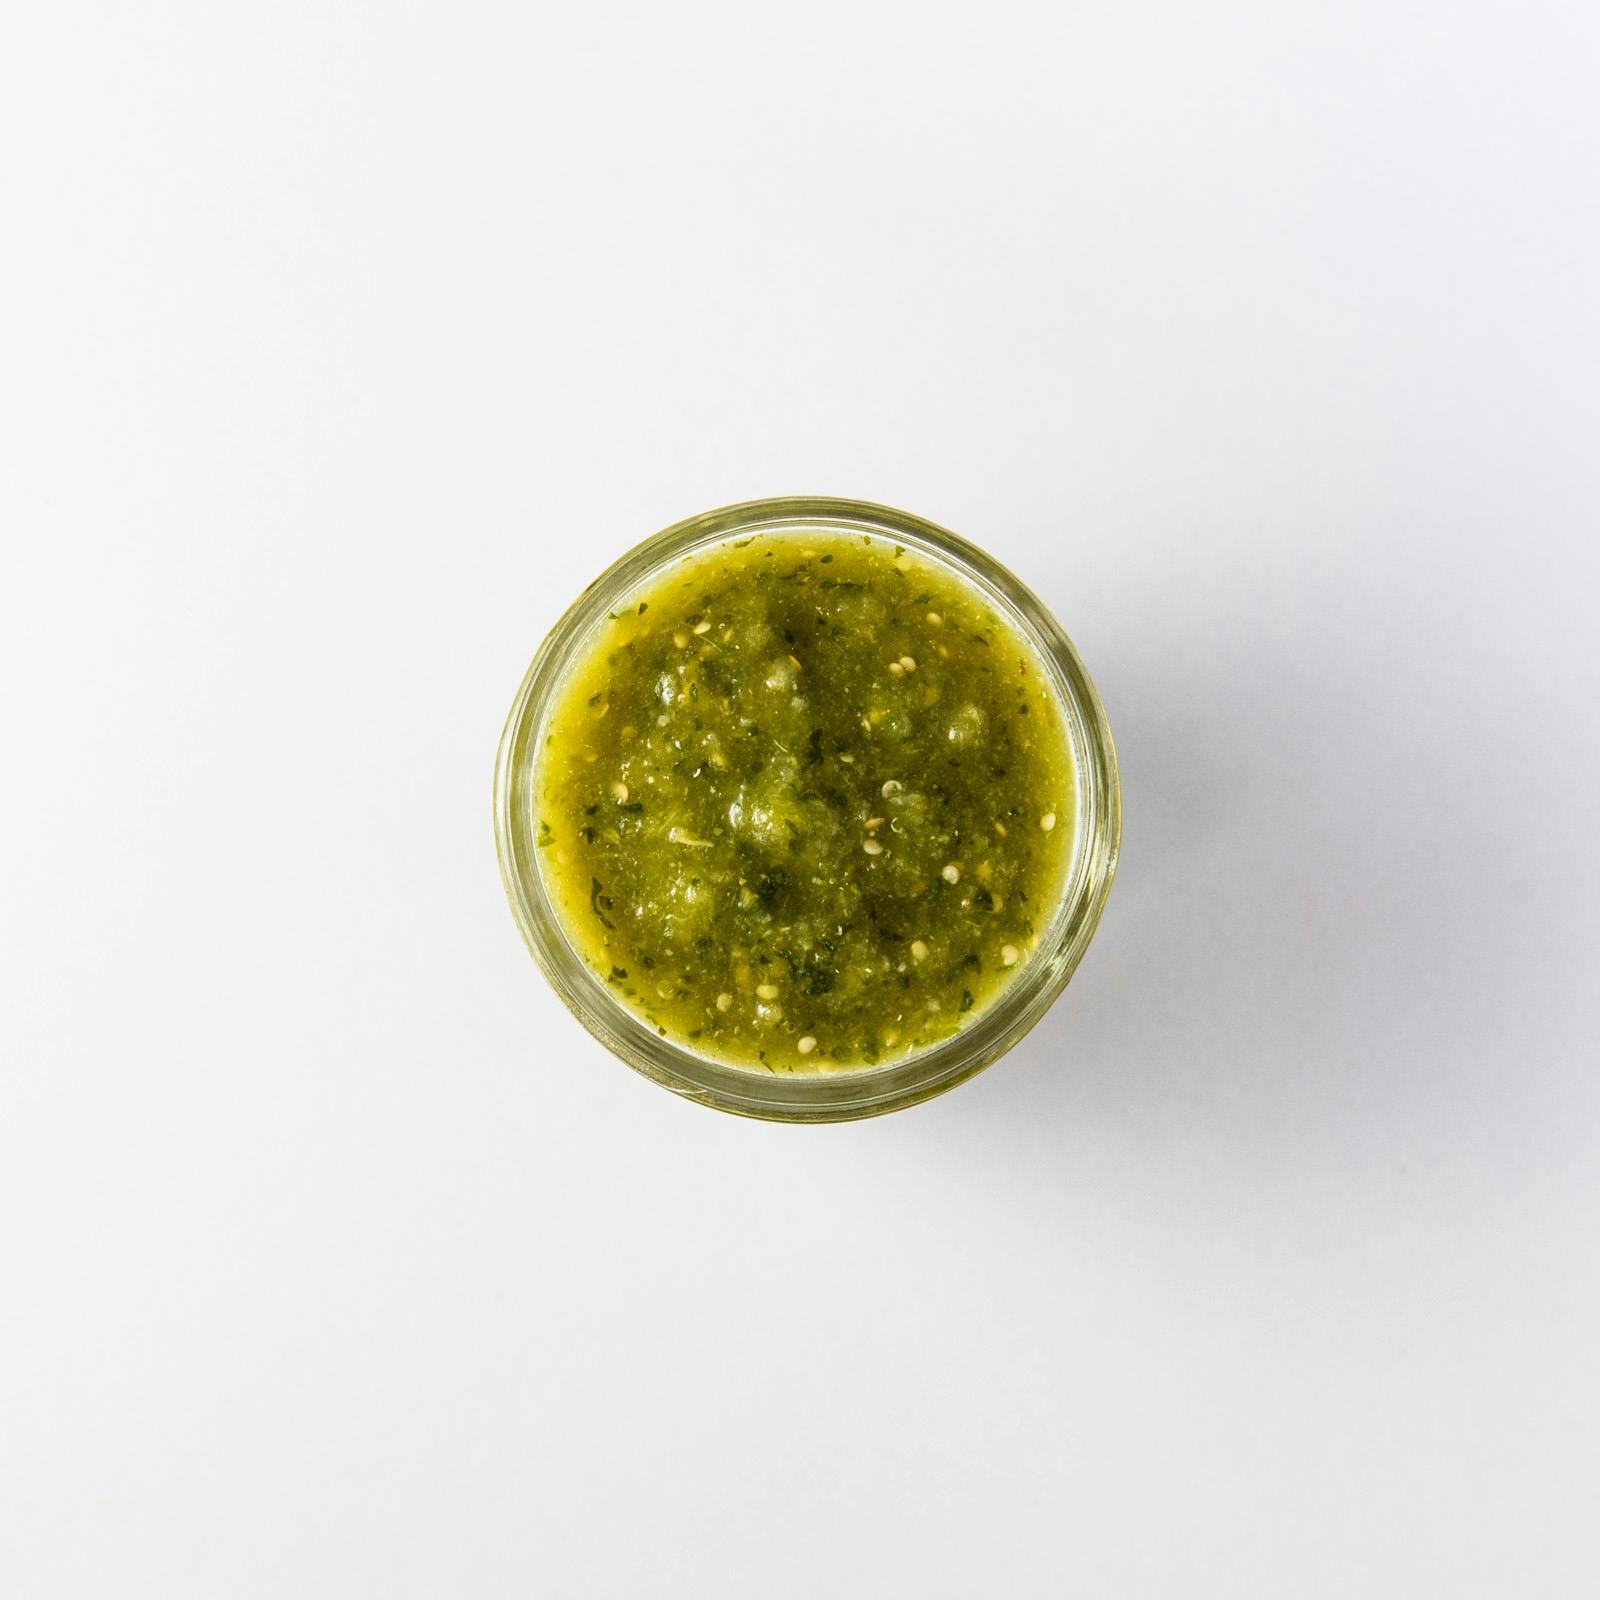 Tomatillo Salsa from Taco Royale - Downtown Madison in Madison, WI